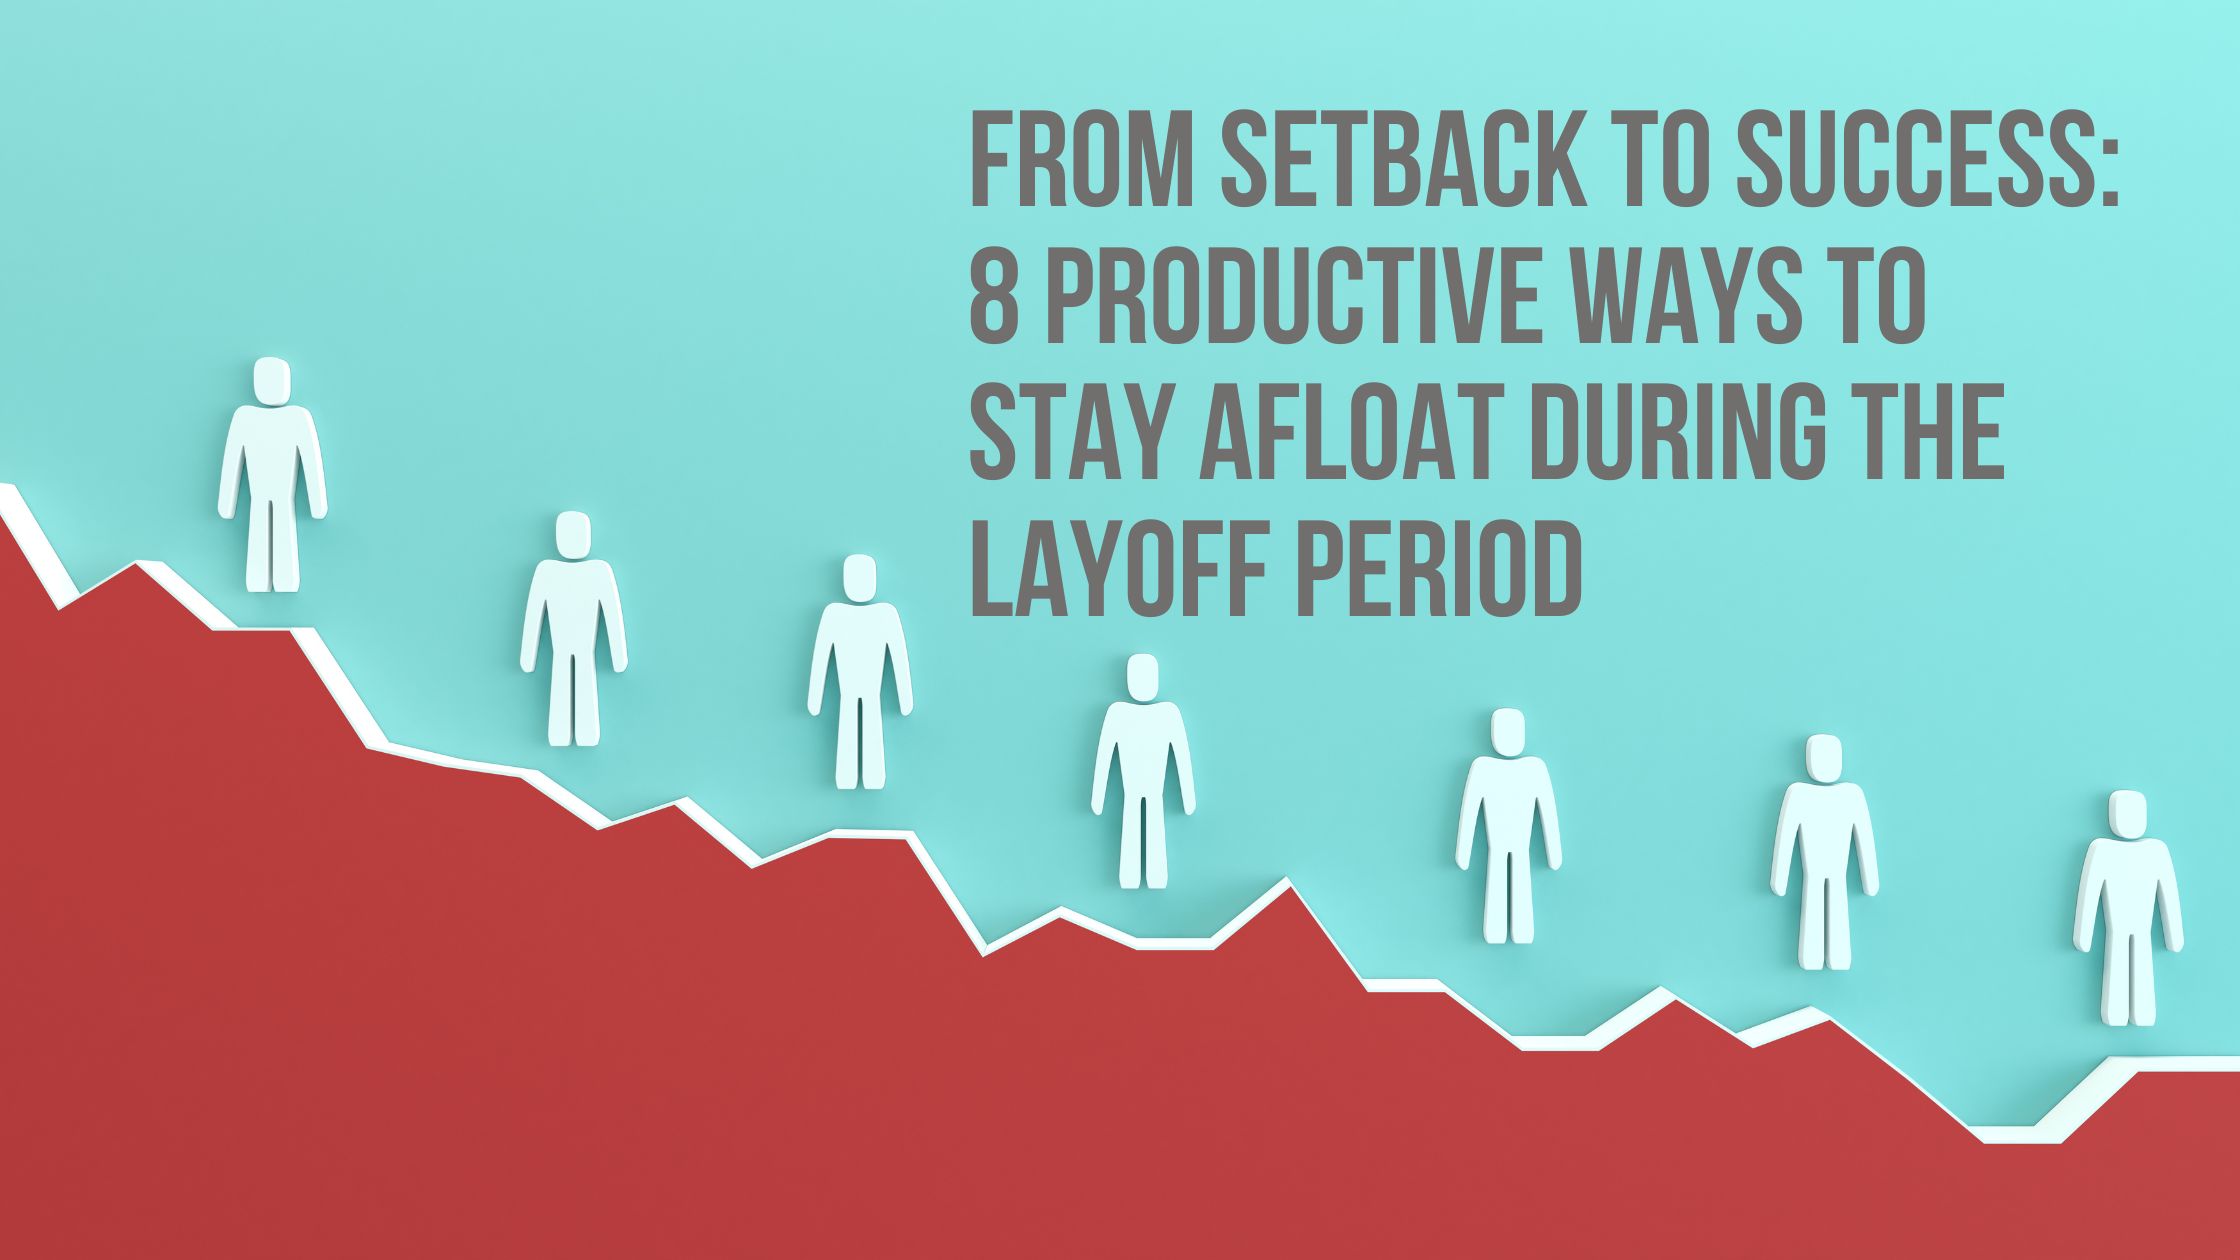 From setback to success: 8 productive ways to stay afloat during the layoff period